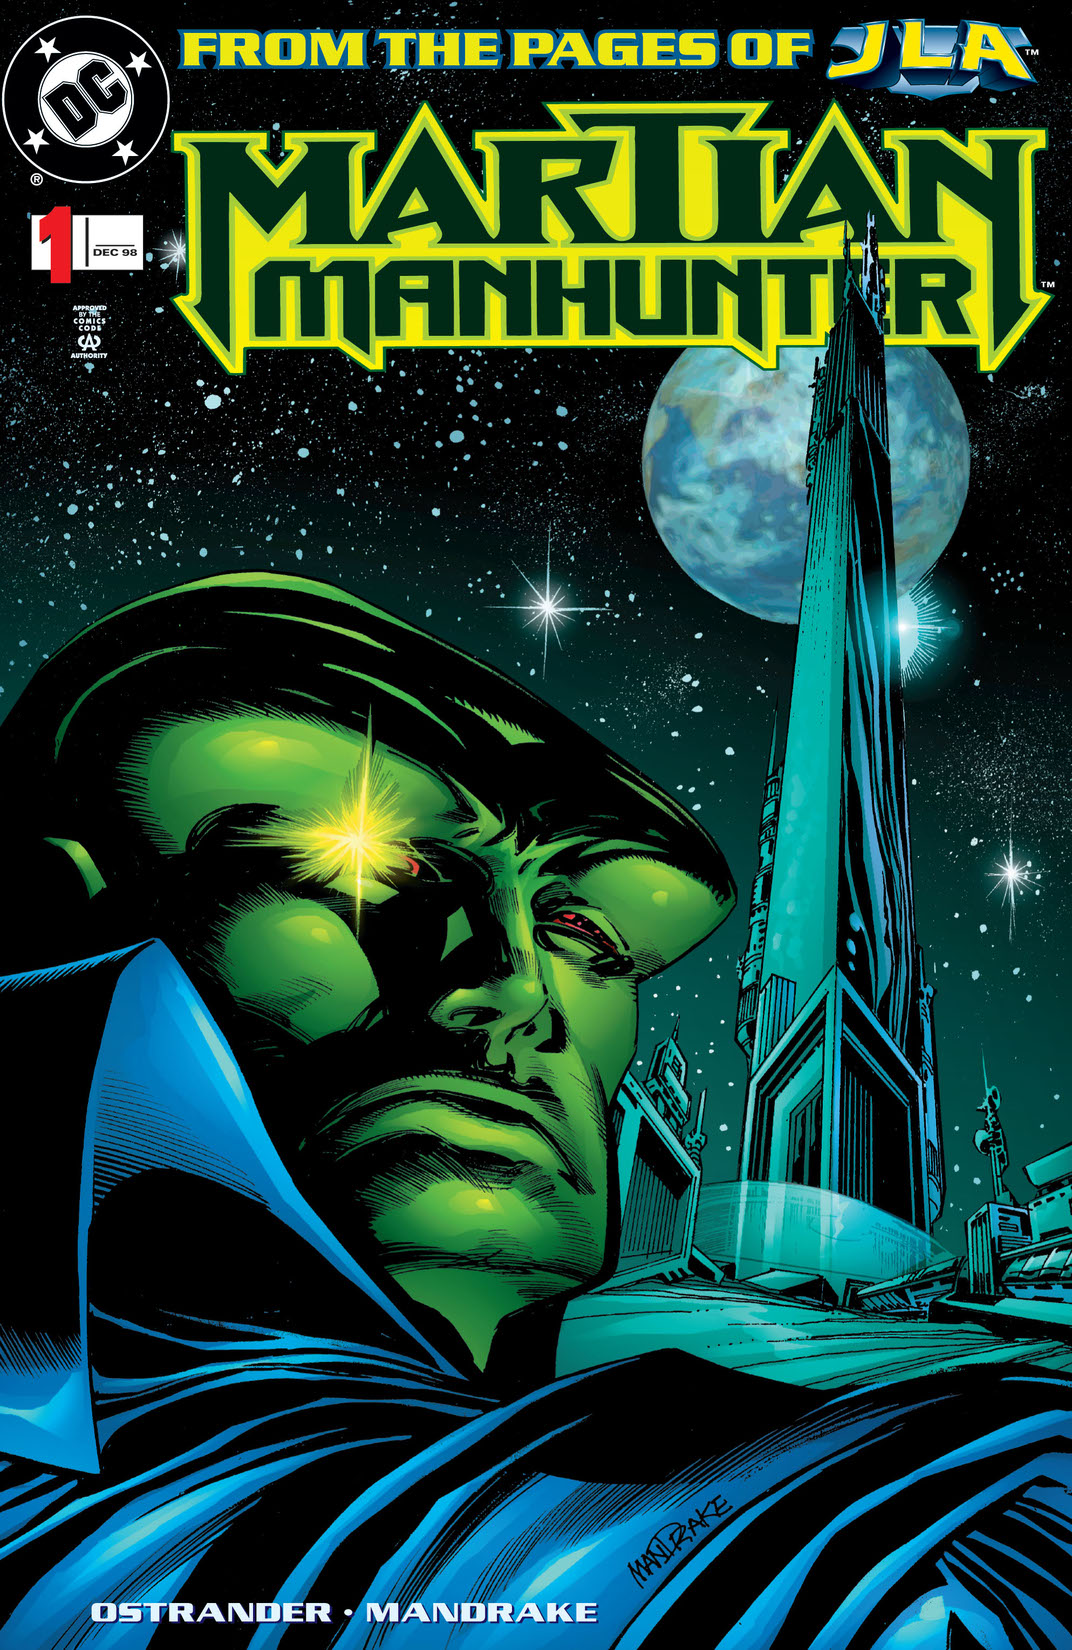 Martian Manhunter (1998-) #1 preview images